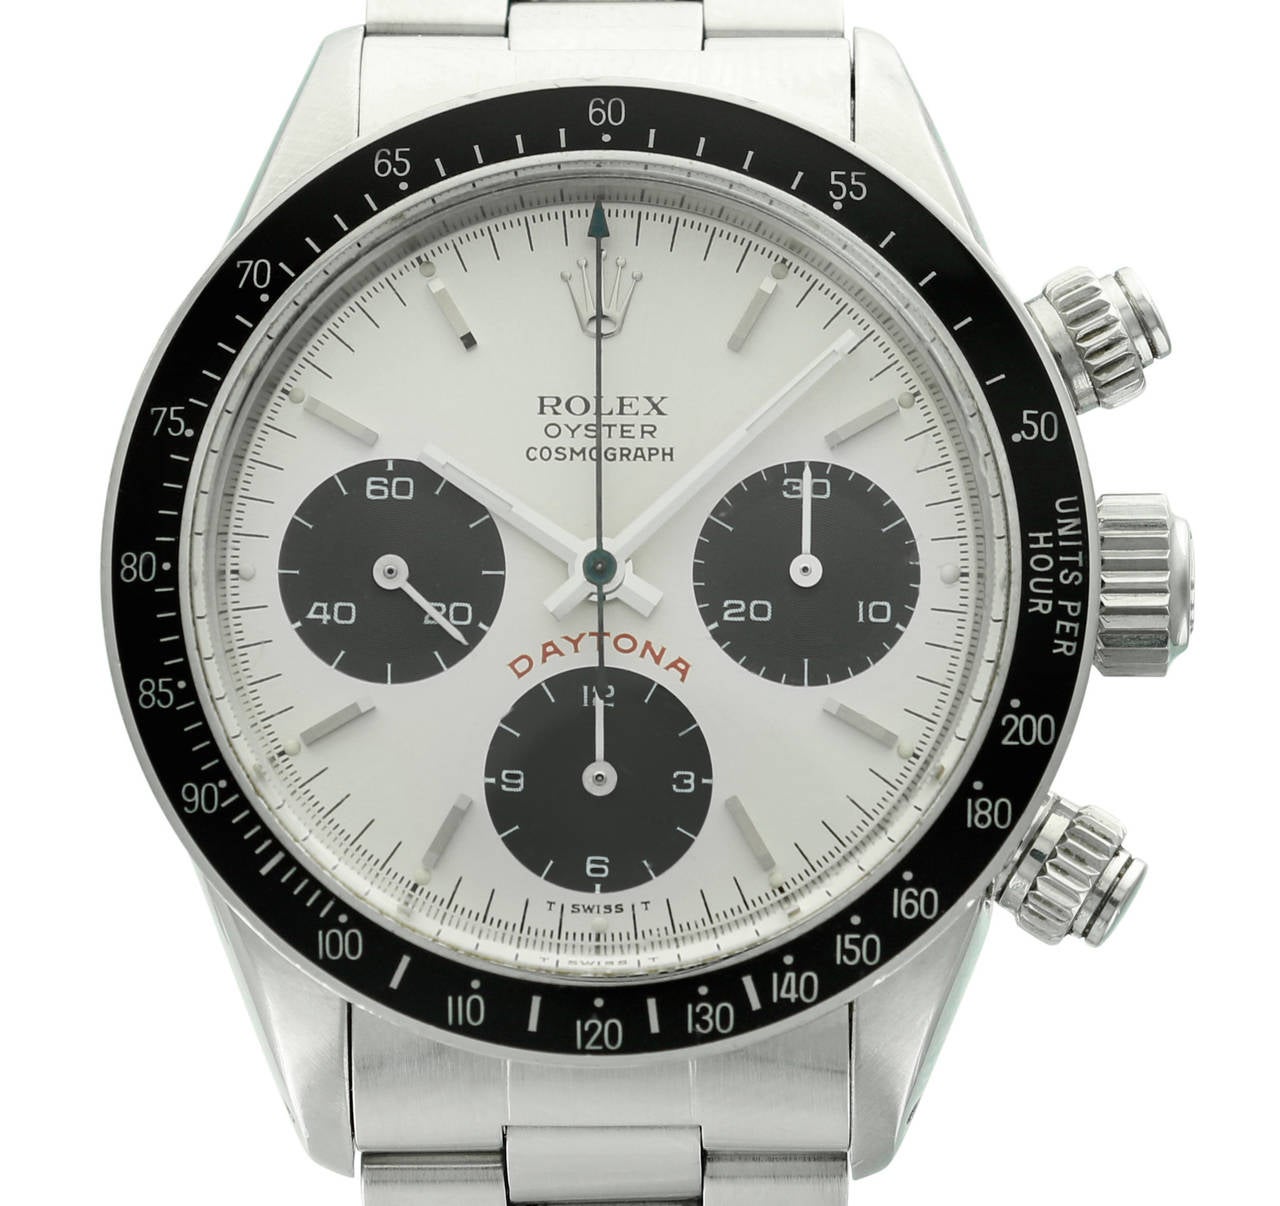 Over the past 50 years the Rolex Daytona has solidified its place in history as one of the most sought after and popular chronographs in existence. The iconic style of the Daytona has been imitated by various brands for decades, but none compare to